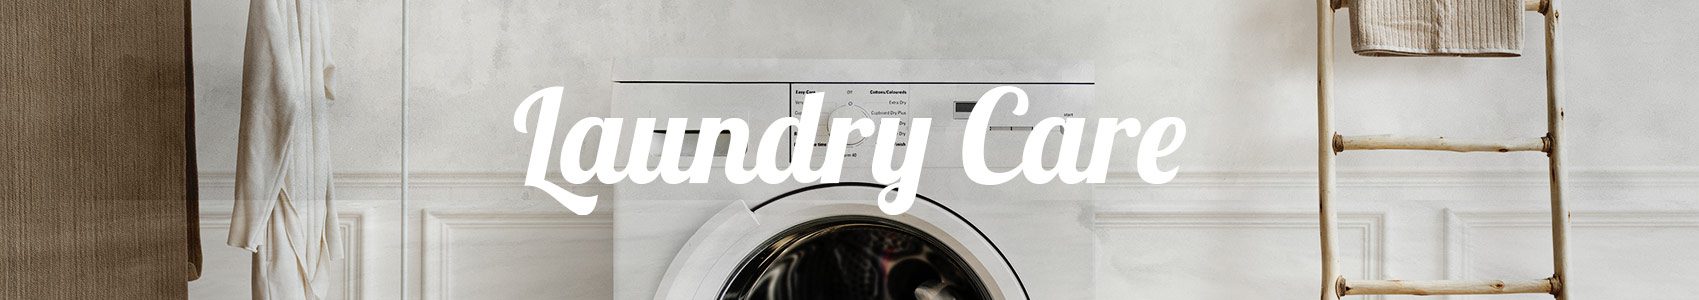 Laundry-Care